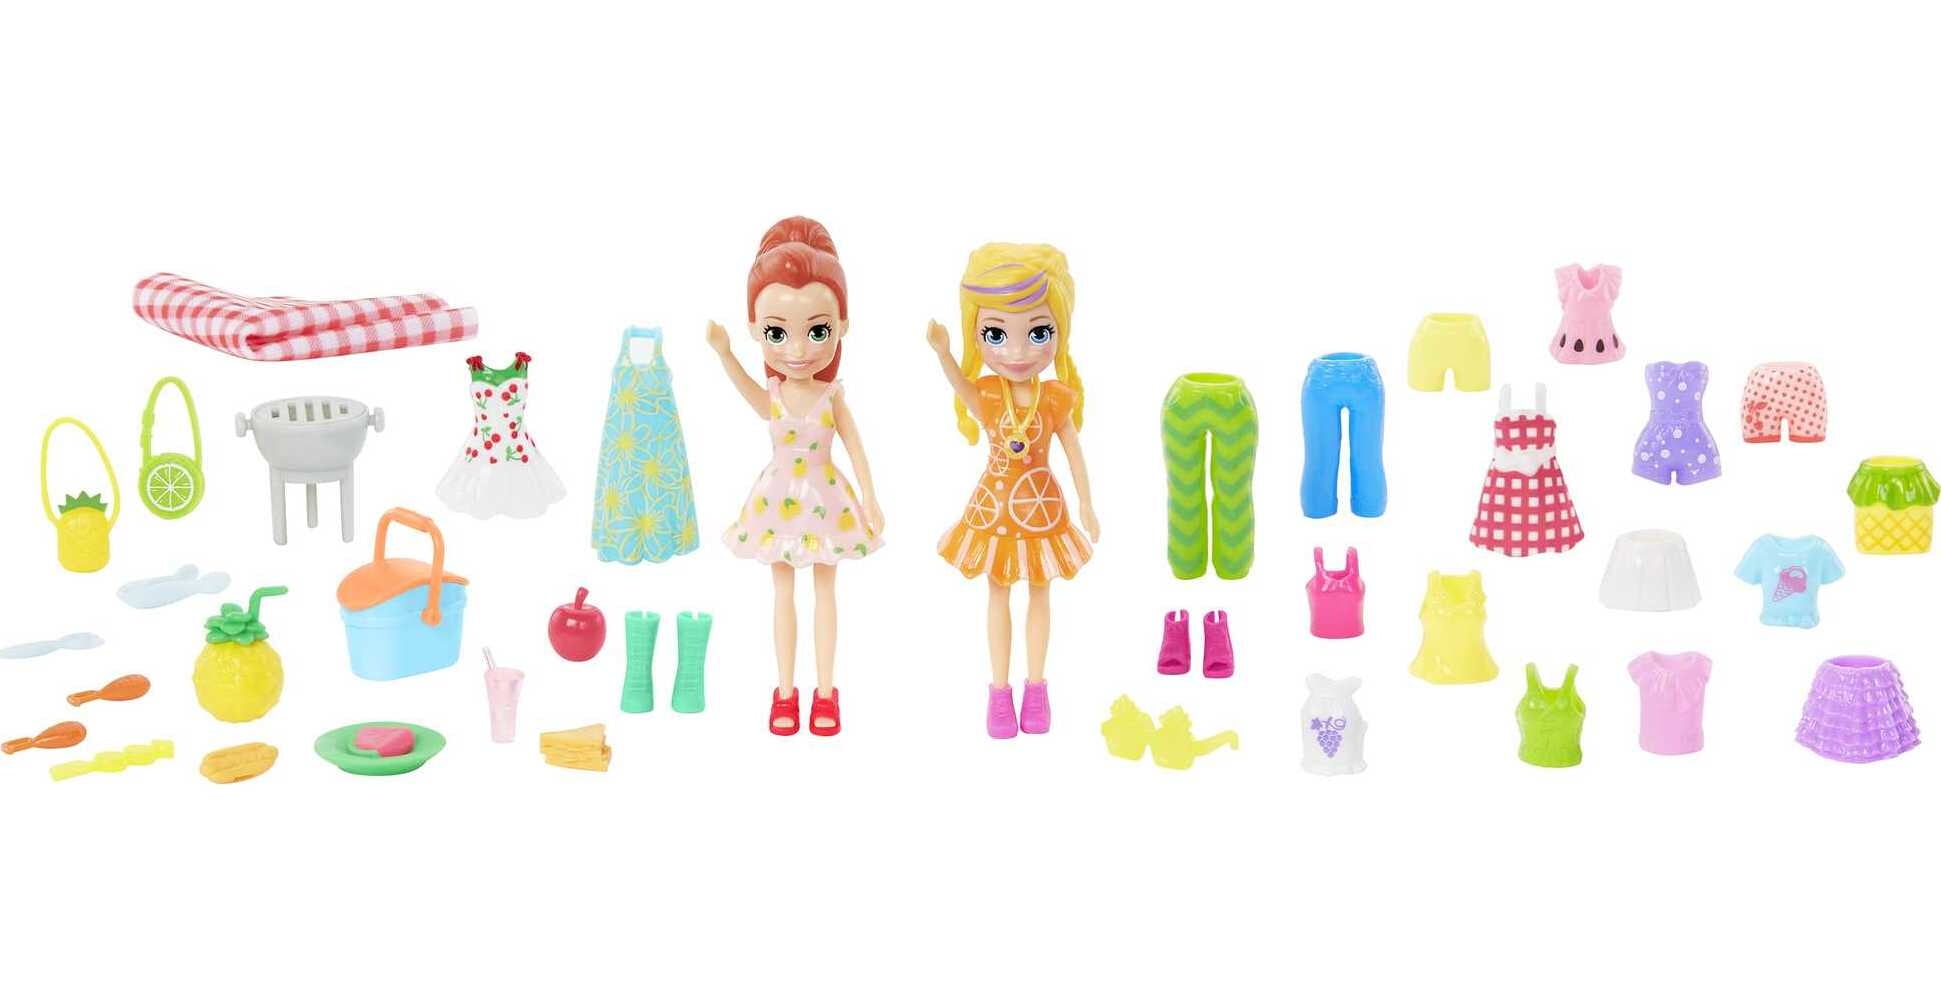 Polly Pocket Pocket Picnic Fashion Pack, 3-inch Polly and Lila Dolls, 42 Fashions & Picnic Accessories, 4 & Up